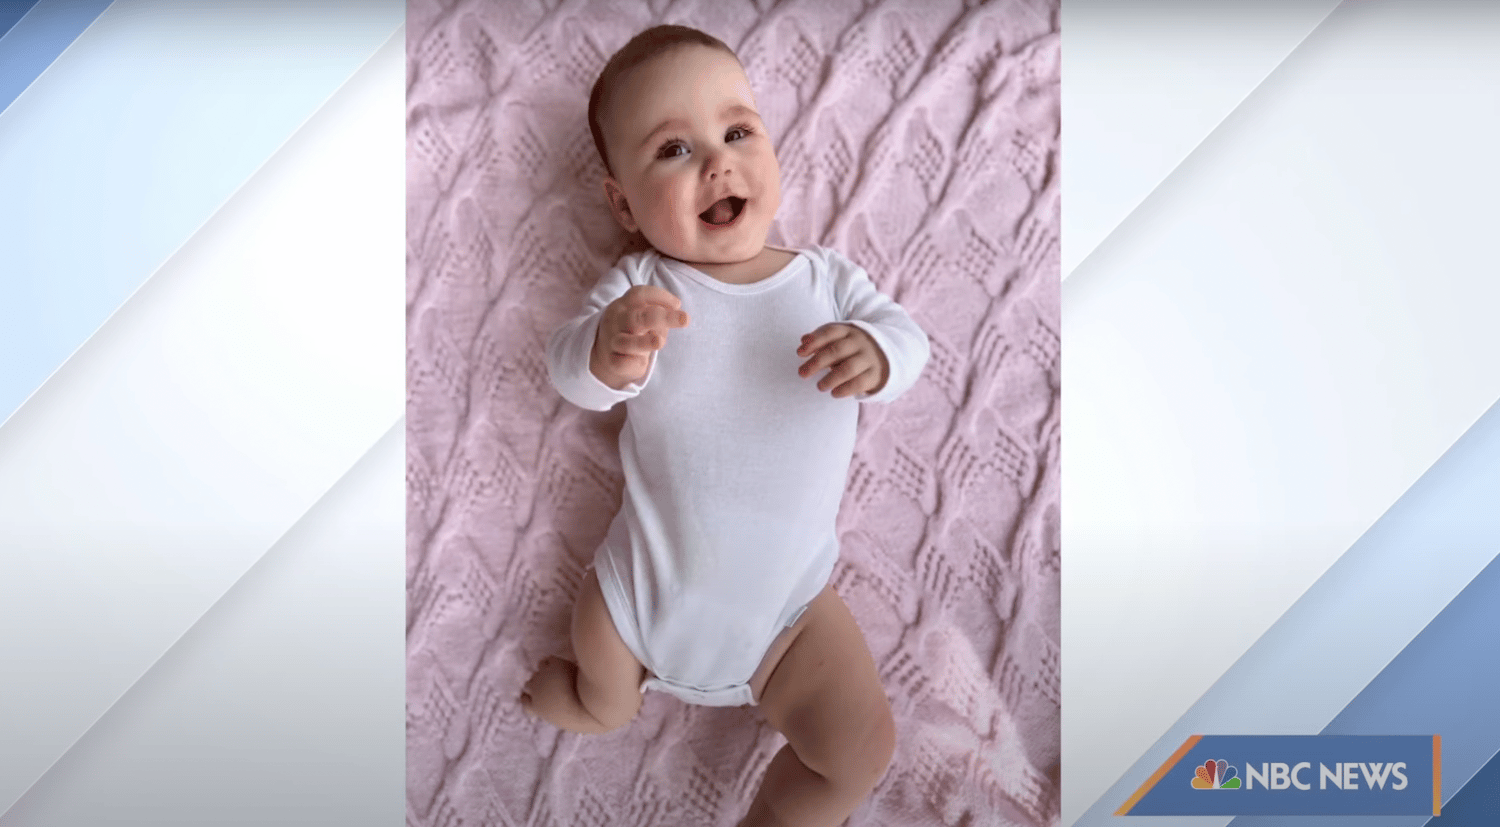 Meet the 2022 Gerber baby who's shining a spotlight on limb differences -  Good Morning America